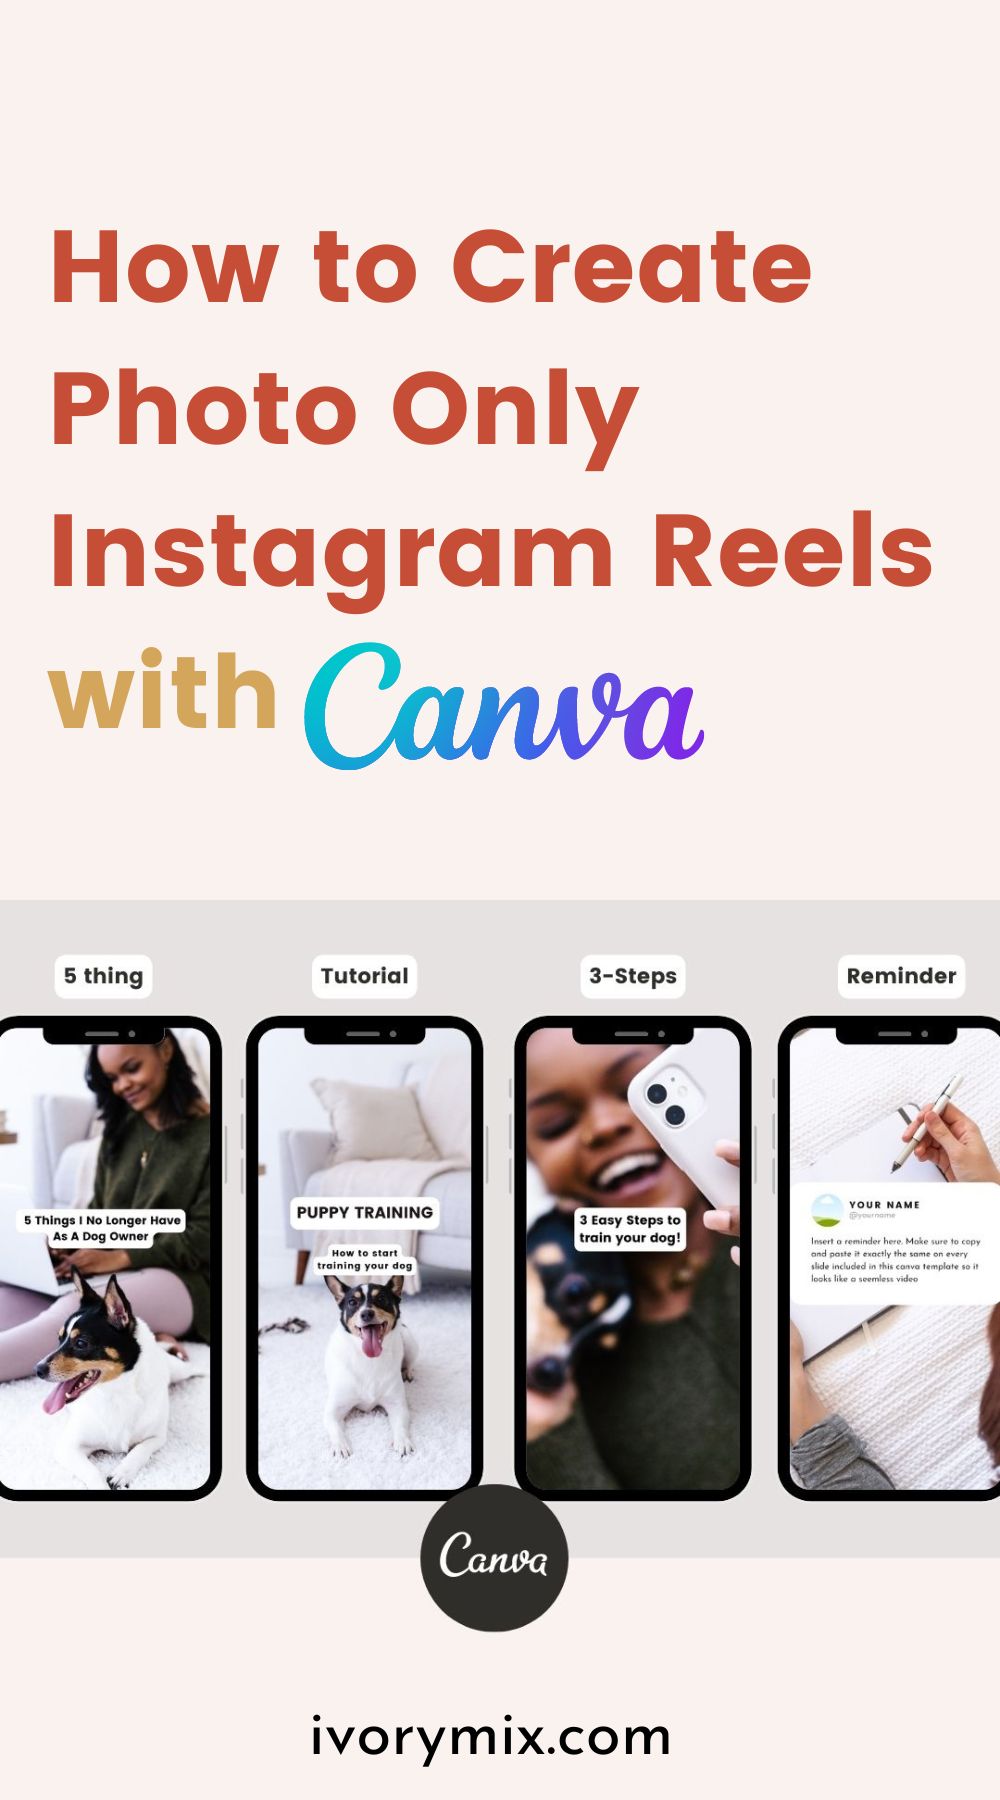 How to Create a Successful Photo-Only Instagram Reel in Canva